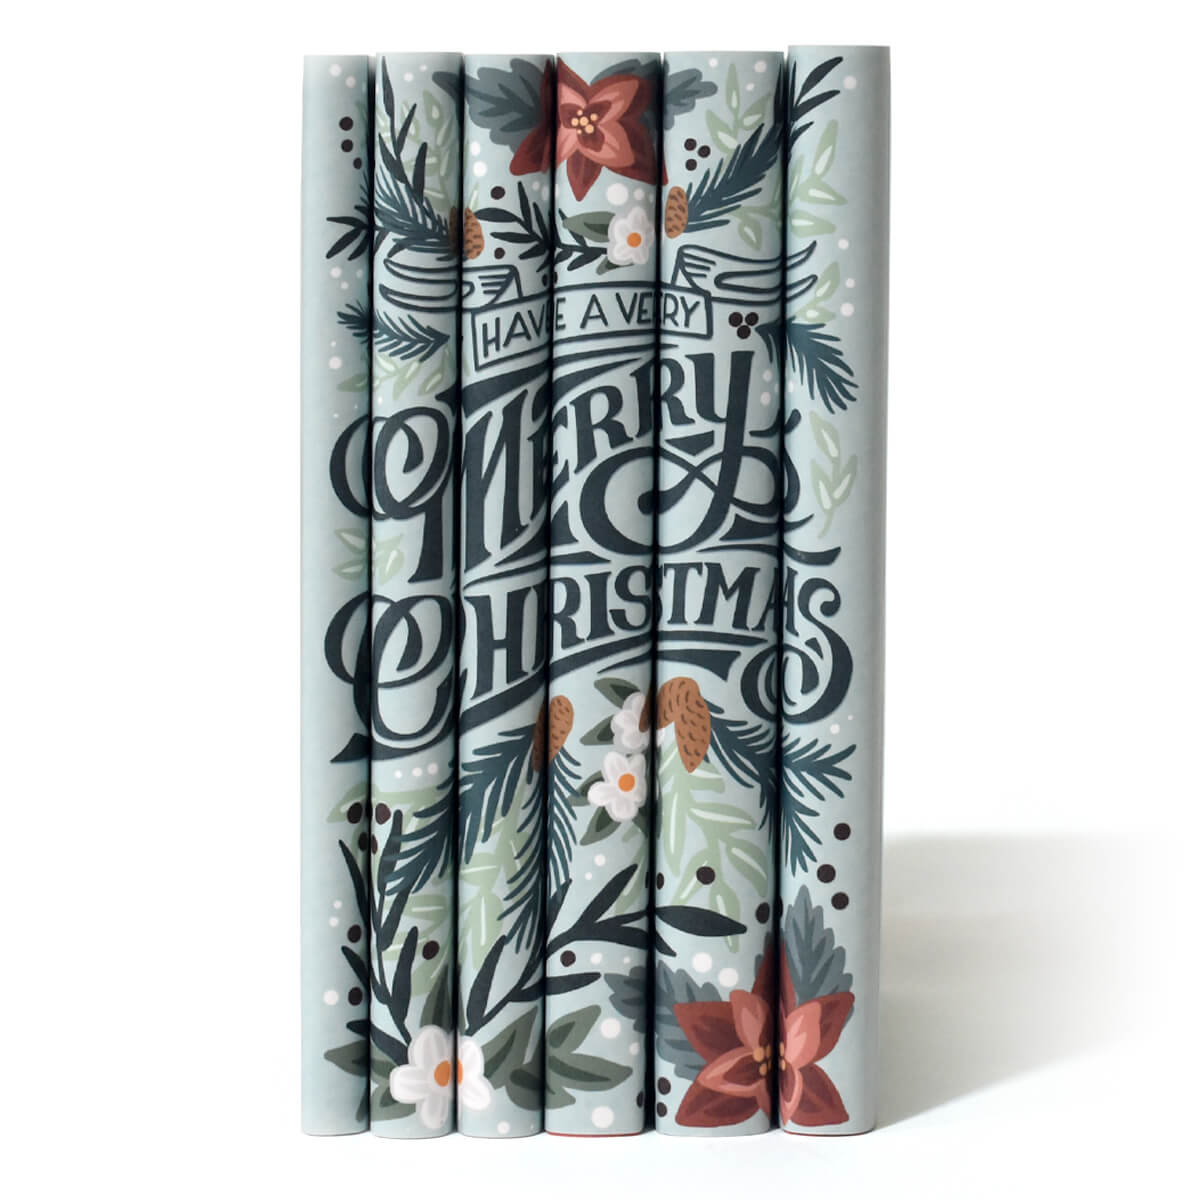 This festive set of novels is the perfect way to celebrate your favorite year-end traditions. Book Set, gift, trade, Christmas shopping. Merry Christmas written across spines featuring illustrated pine bows and pine cones.